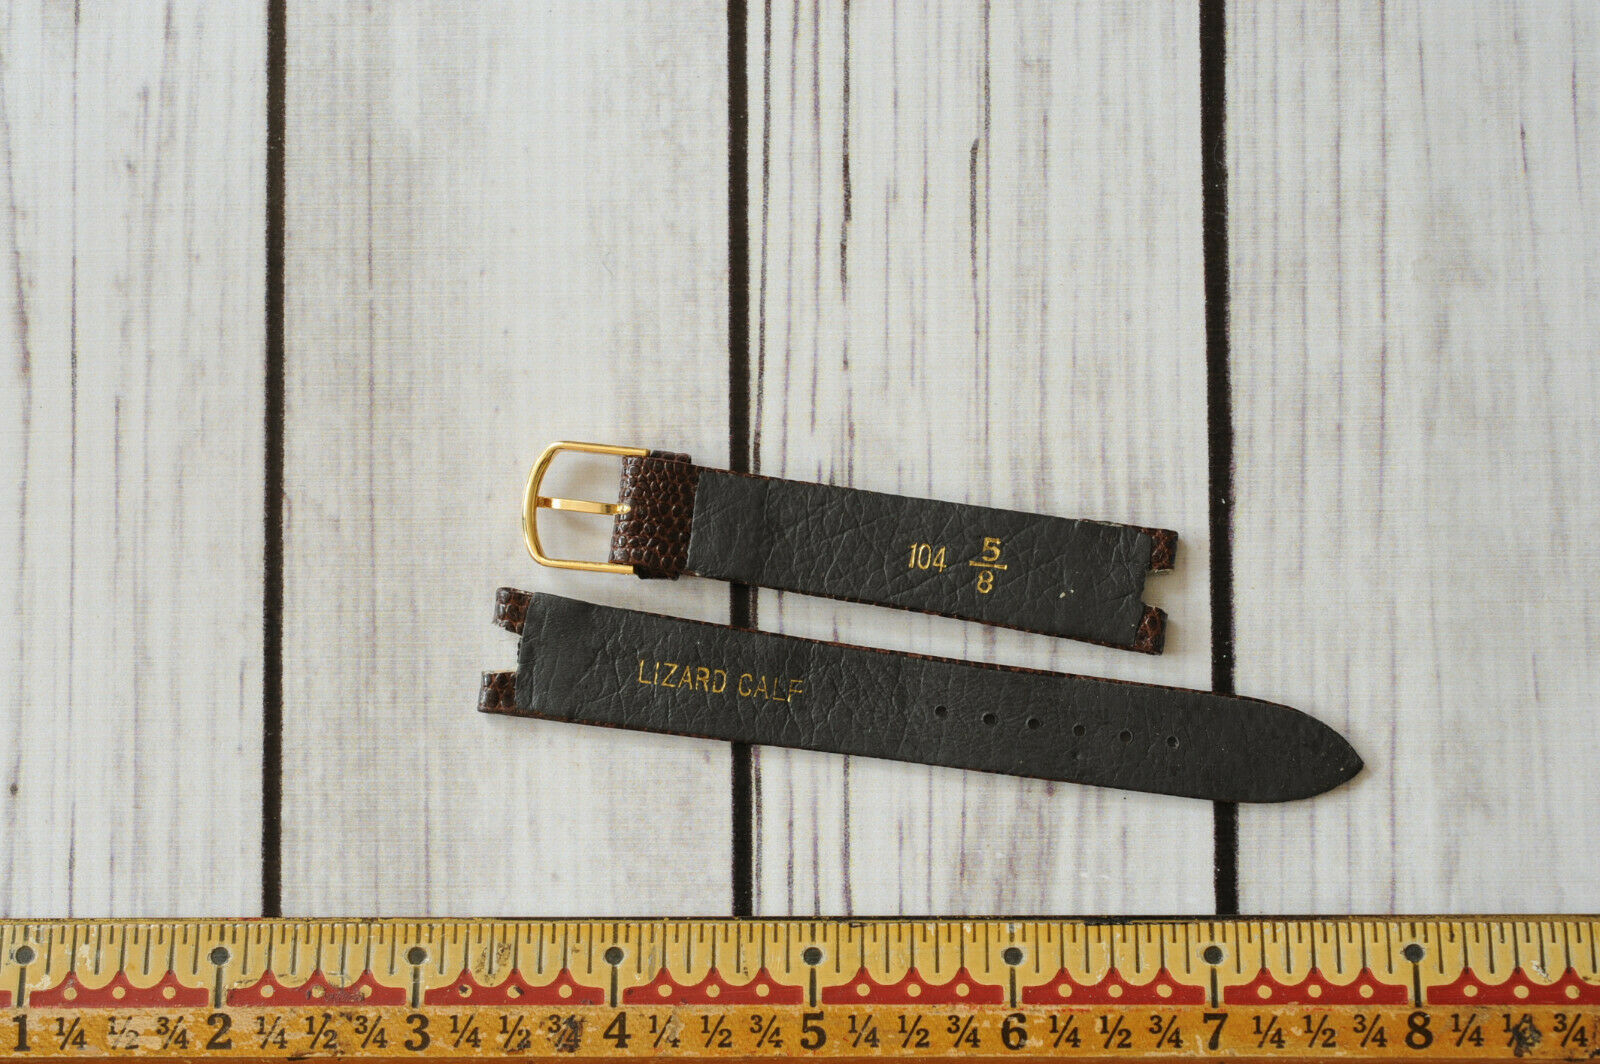 Primary image for vintage Speidel lizard calf skin leather watch band strap dark brown reptile 104